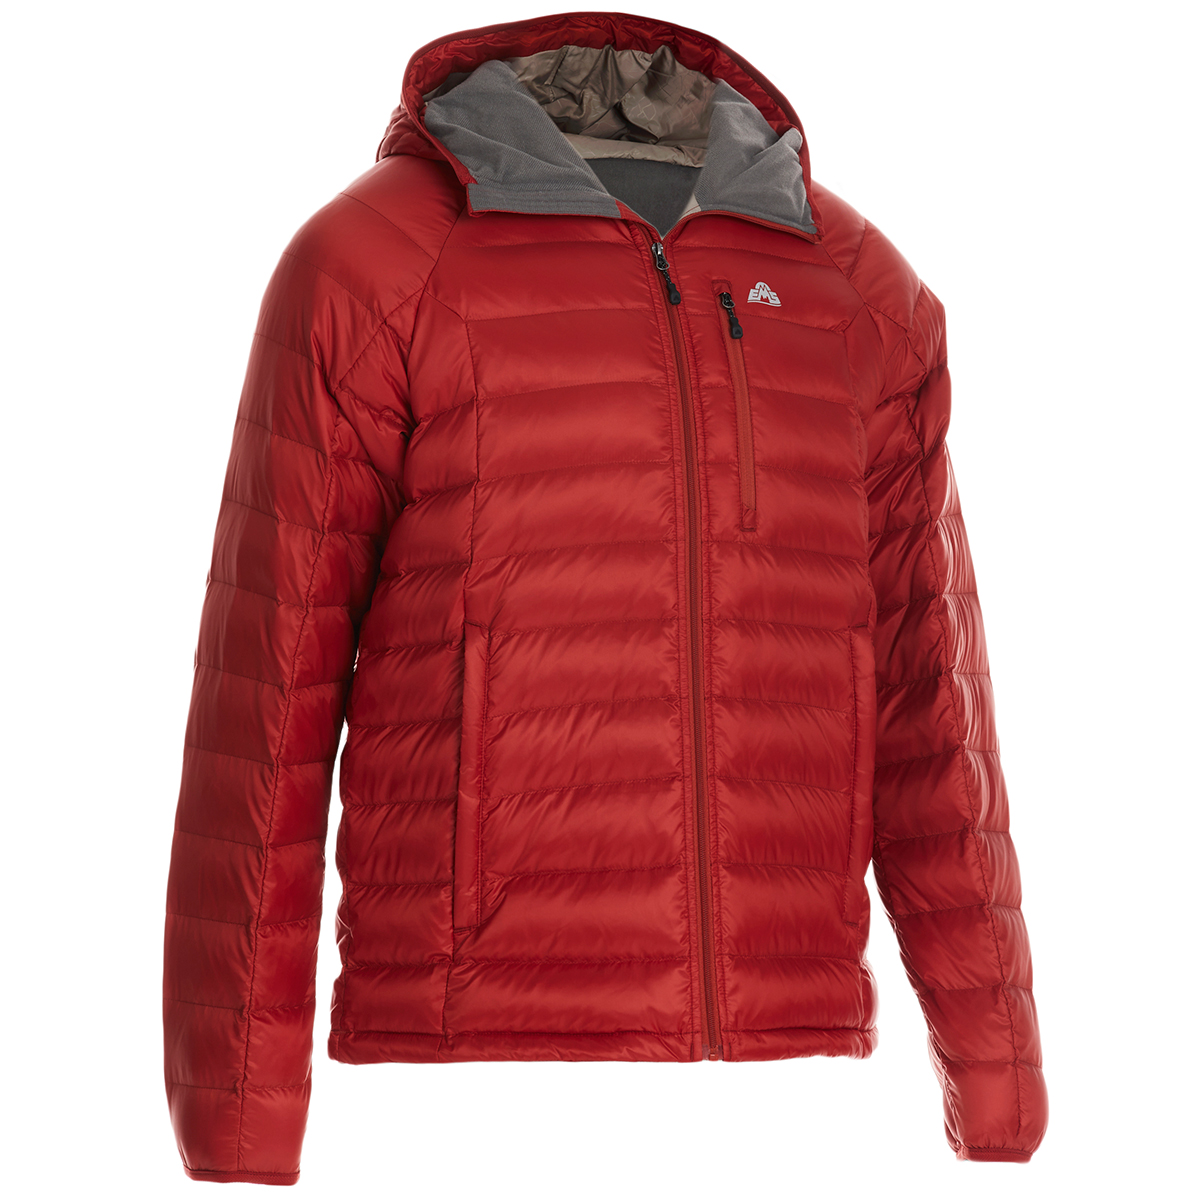 EMS Men's Featherpack Hooded Jacket